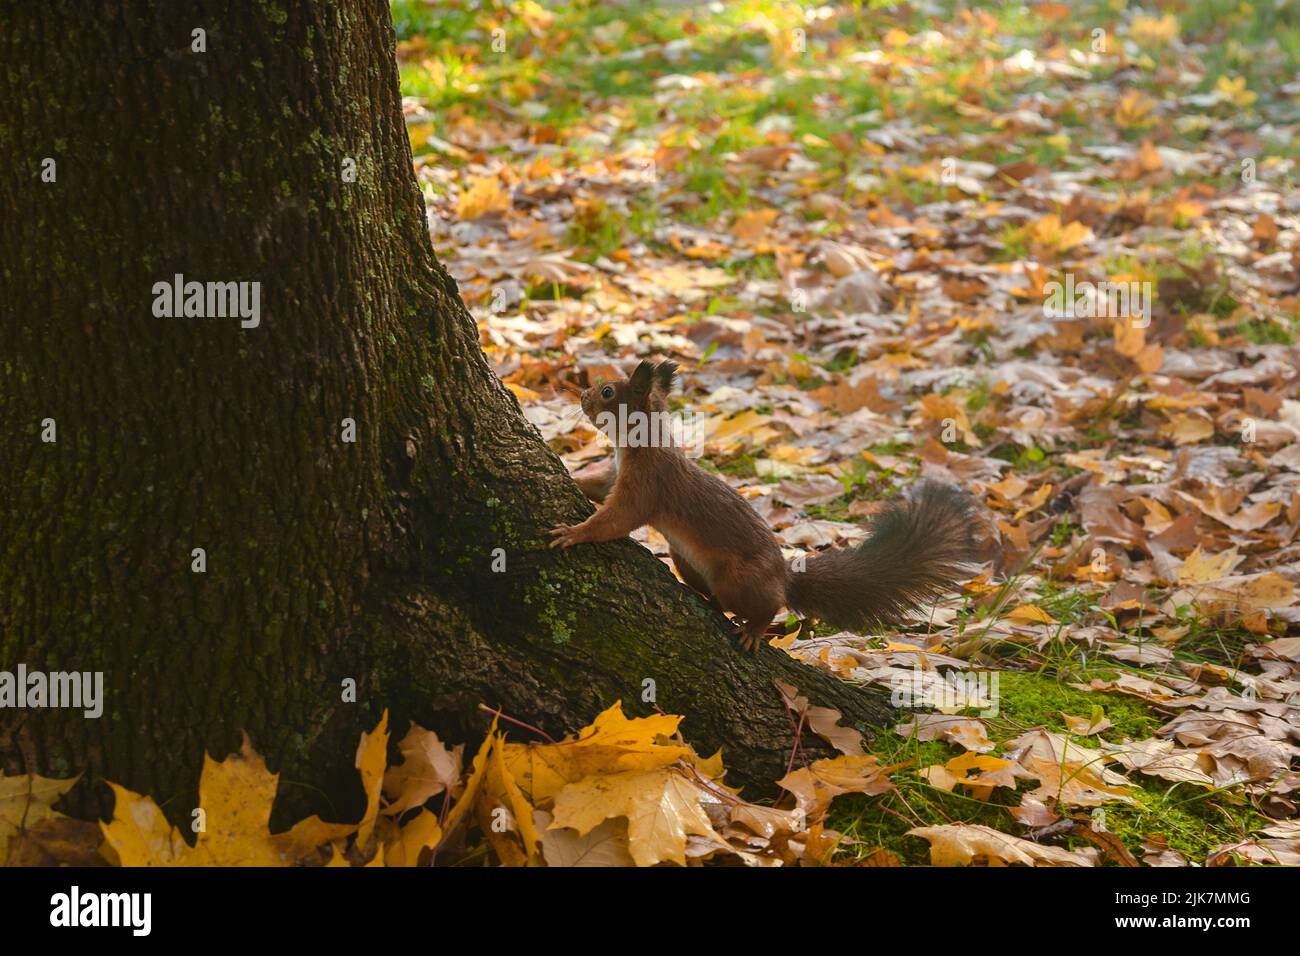 Beautiful cute squirrel going to tree with yellow autumn leaves Stock Photo